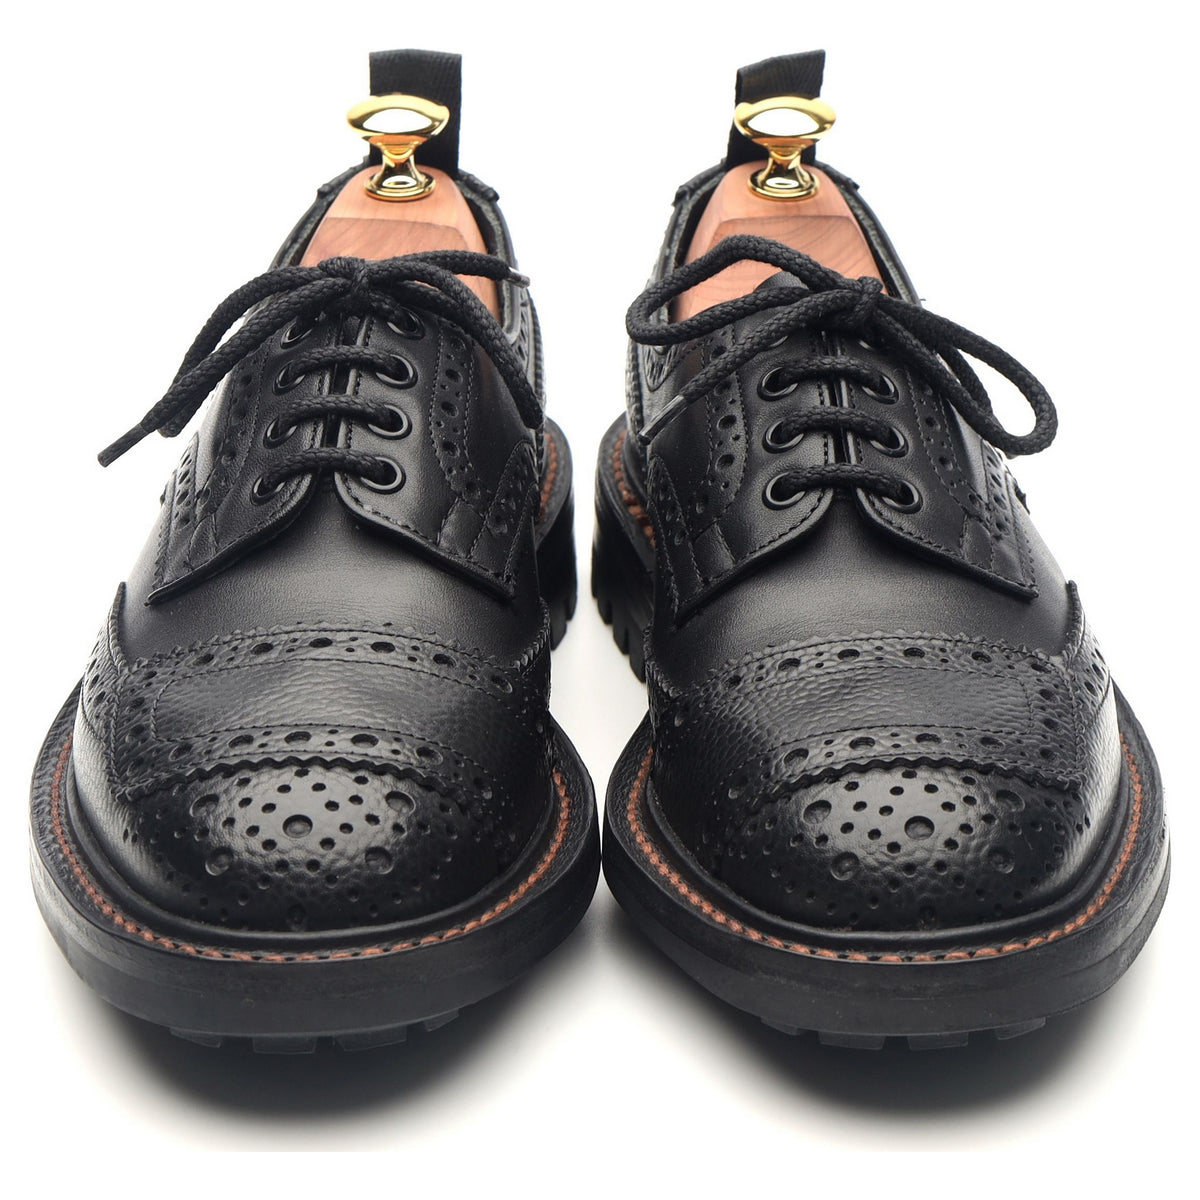 X End Black Leather Derby Brogues UK 6